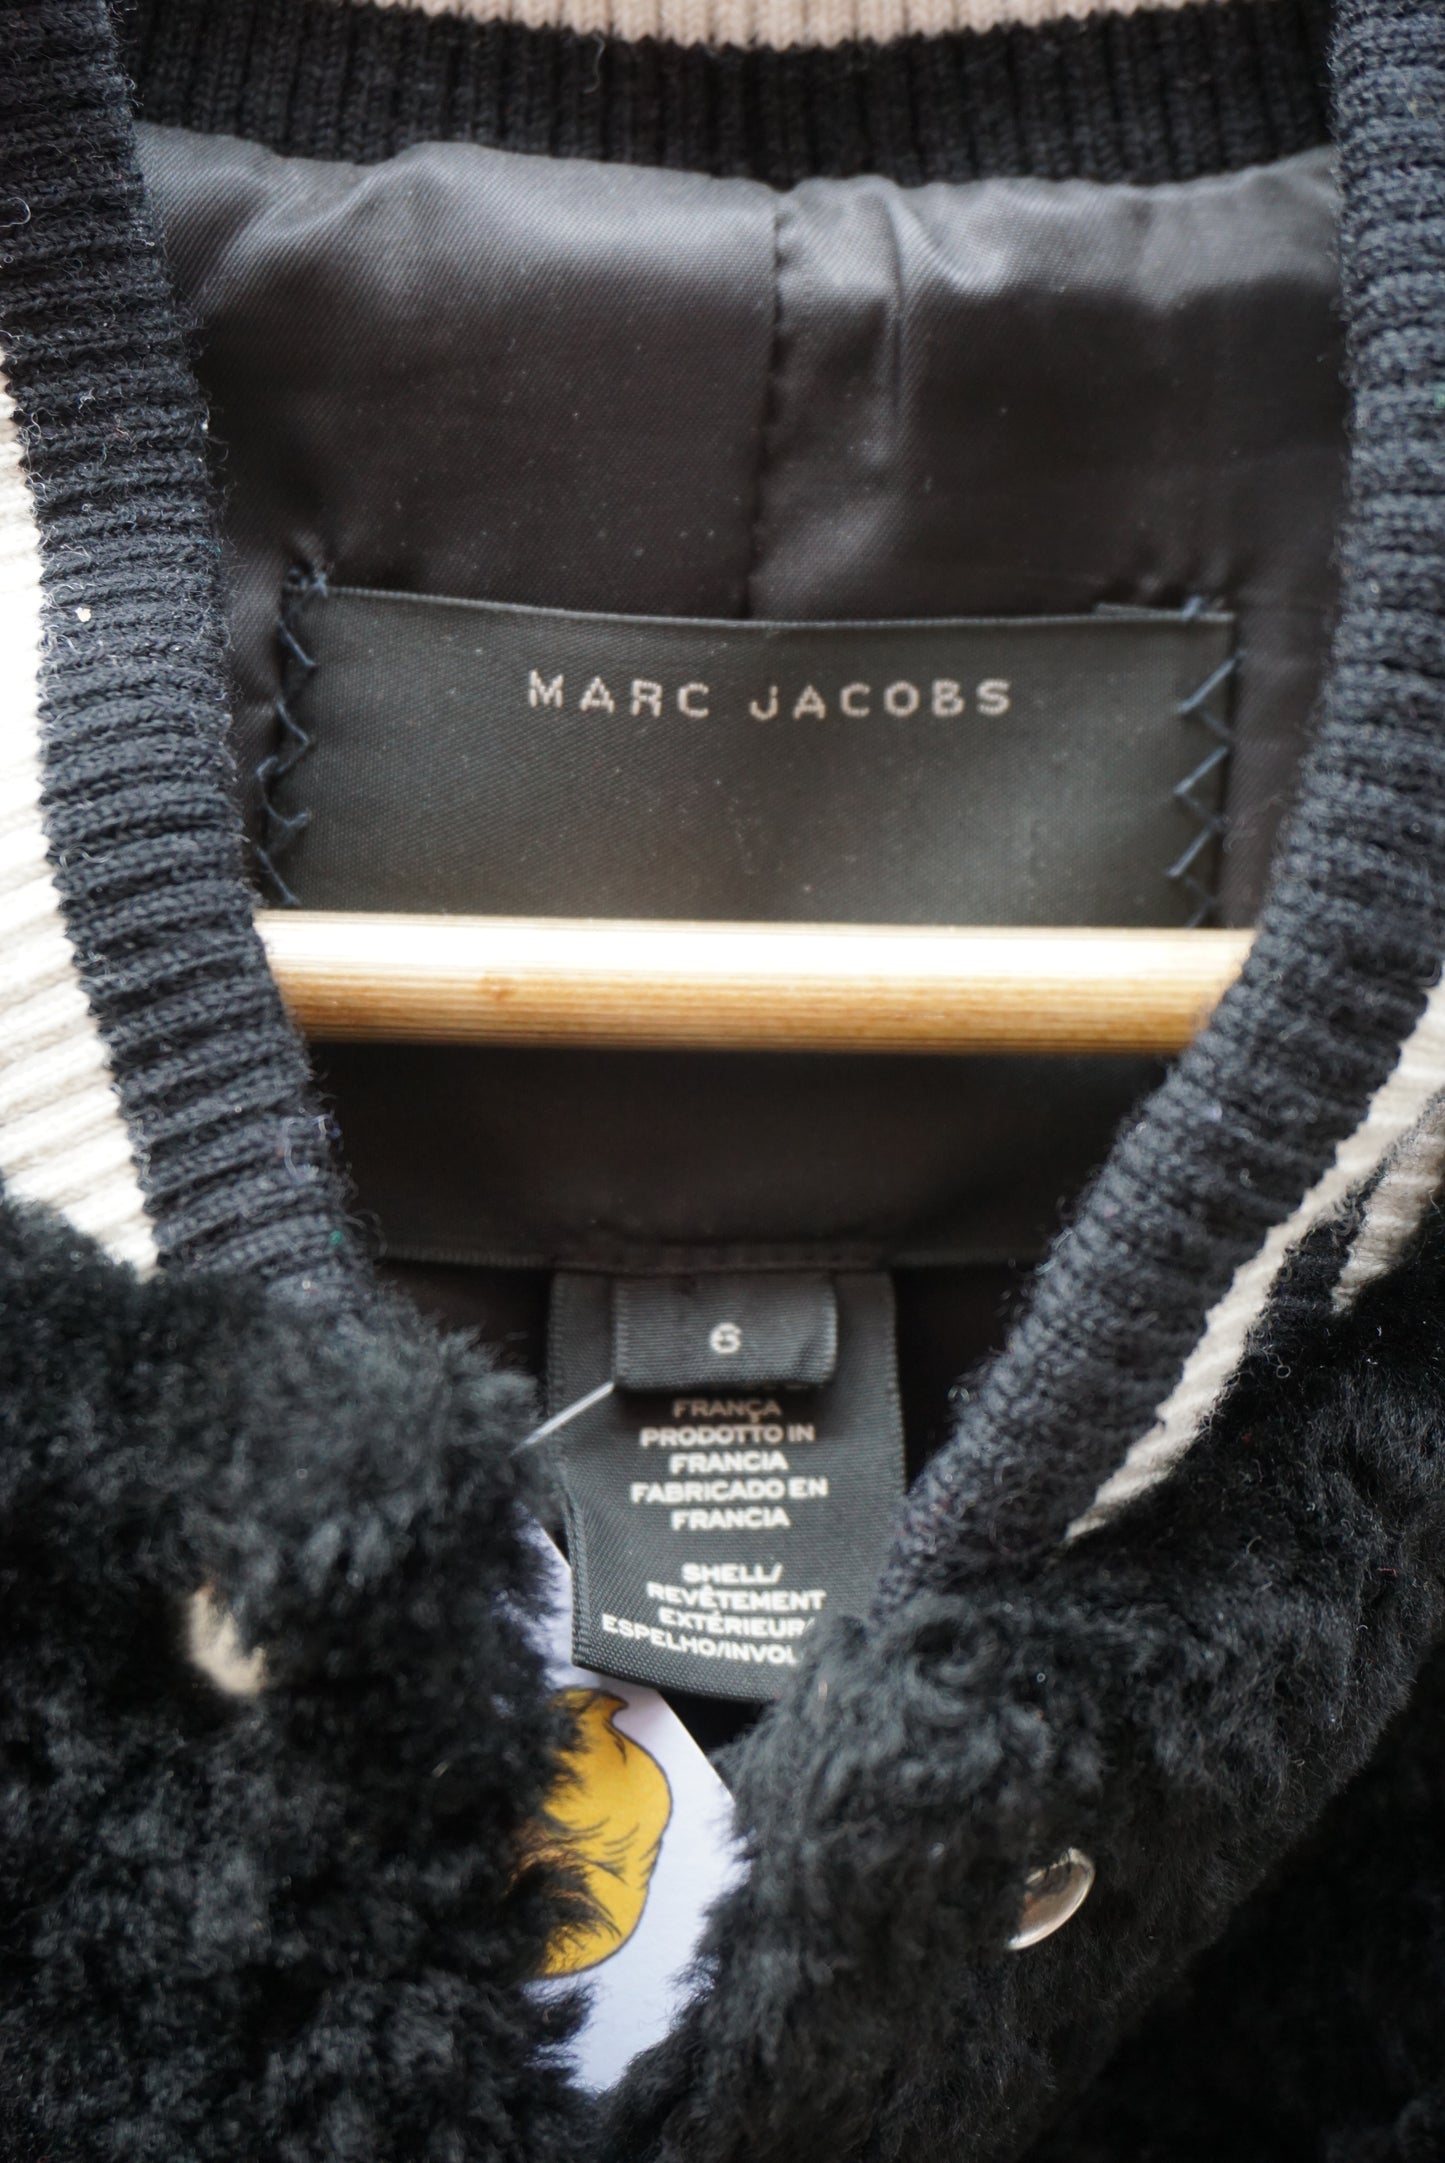 Marc Jacobs X Disney Shearling Jacket - Size S - High Fashion Designer Mickey Mouse Colab